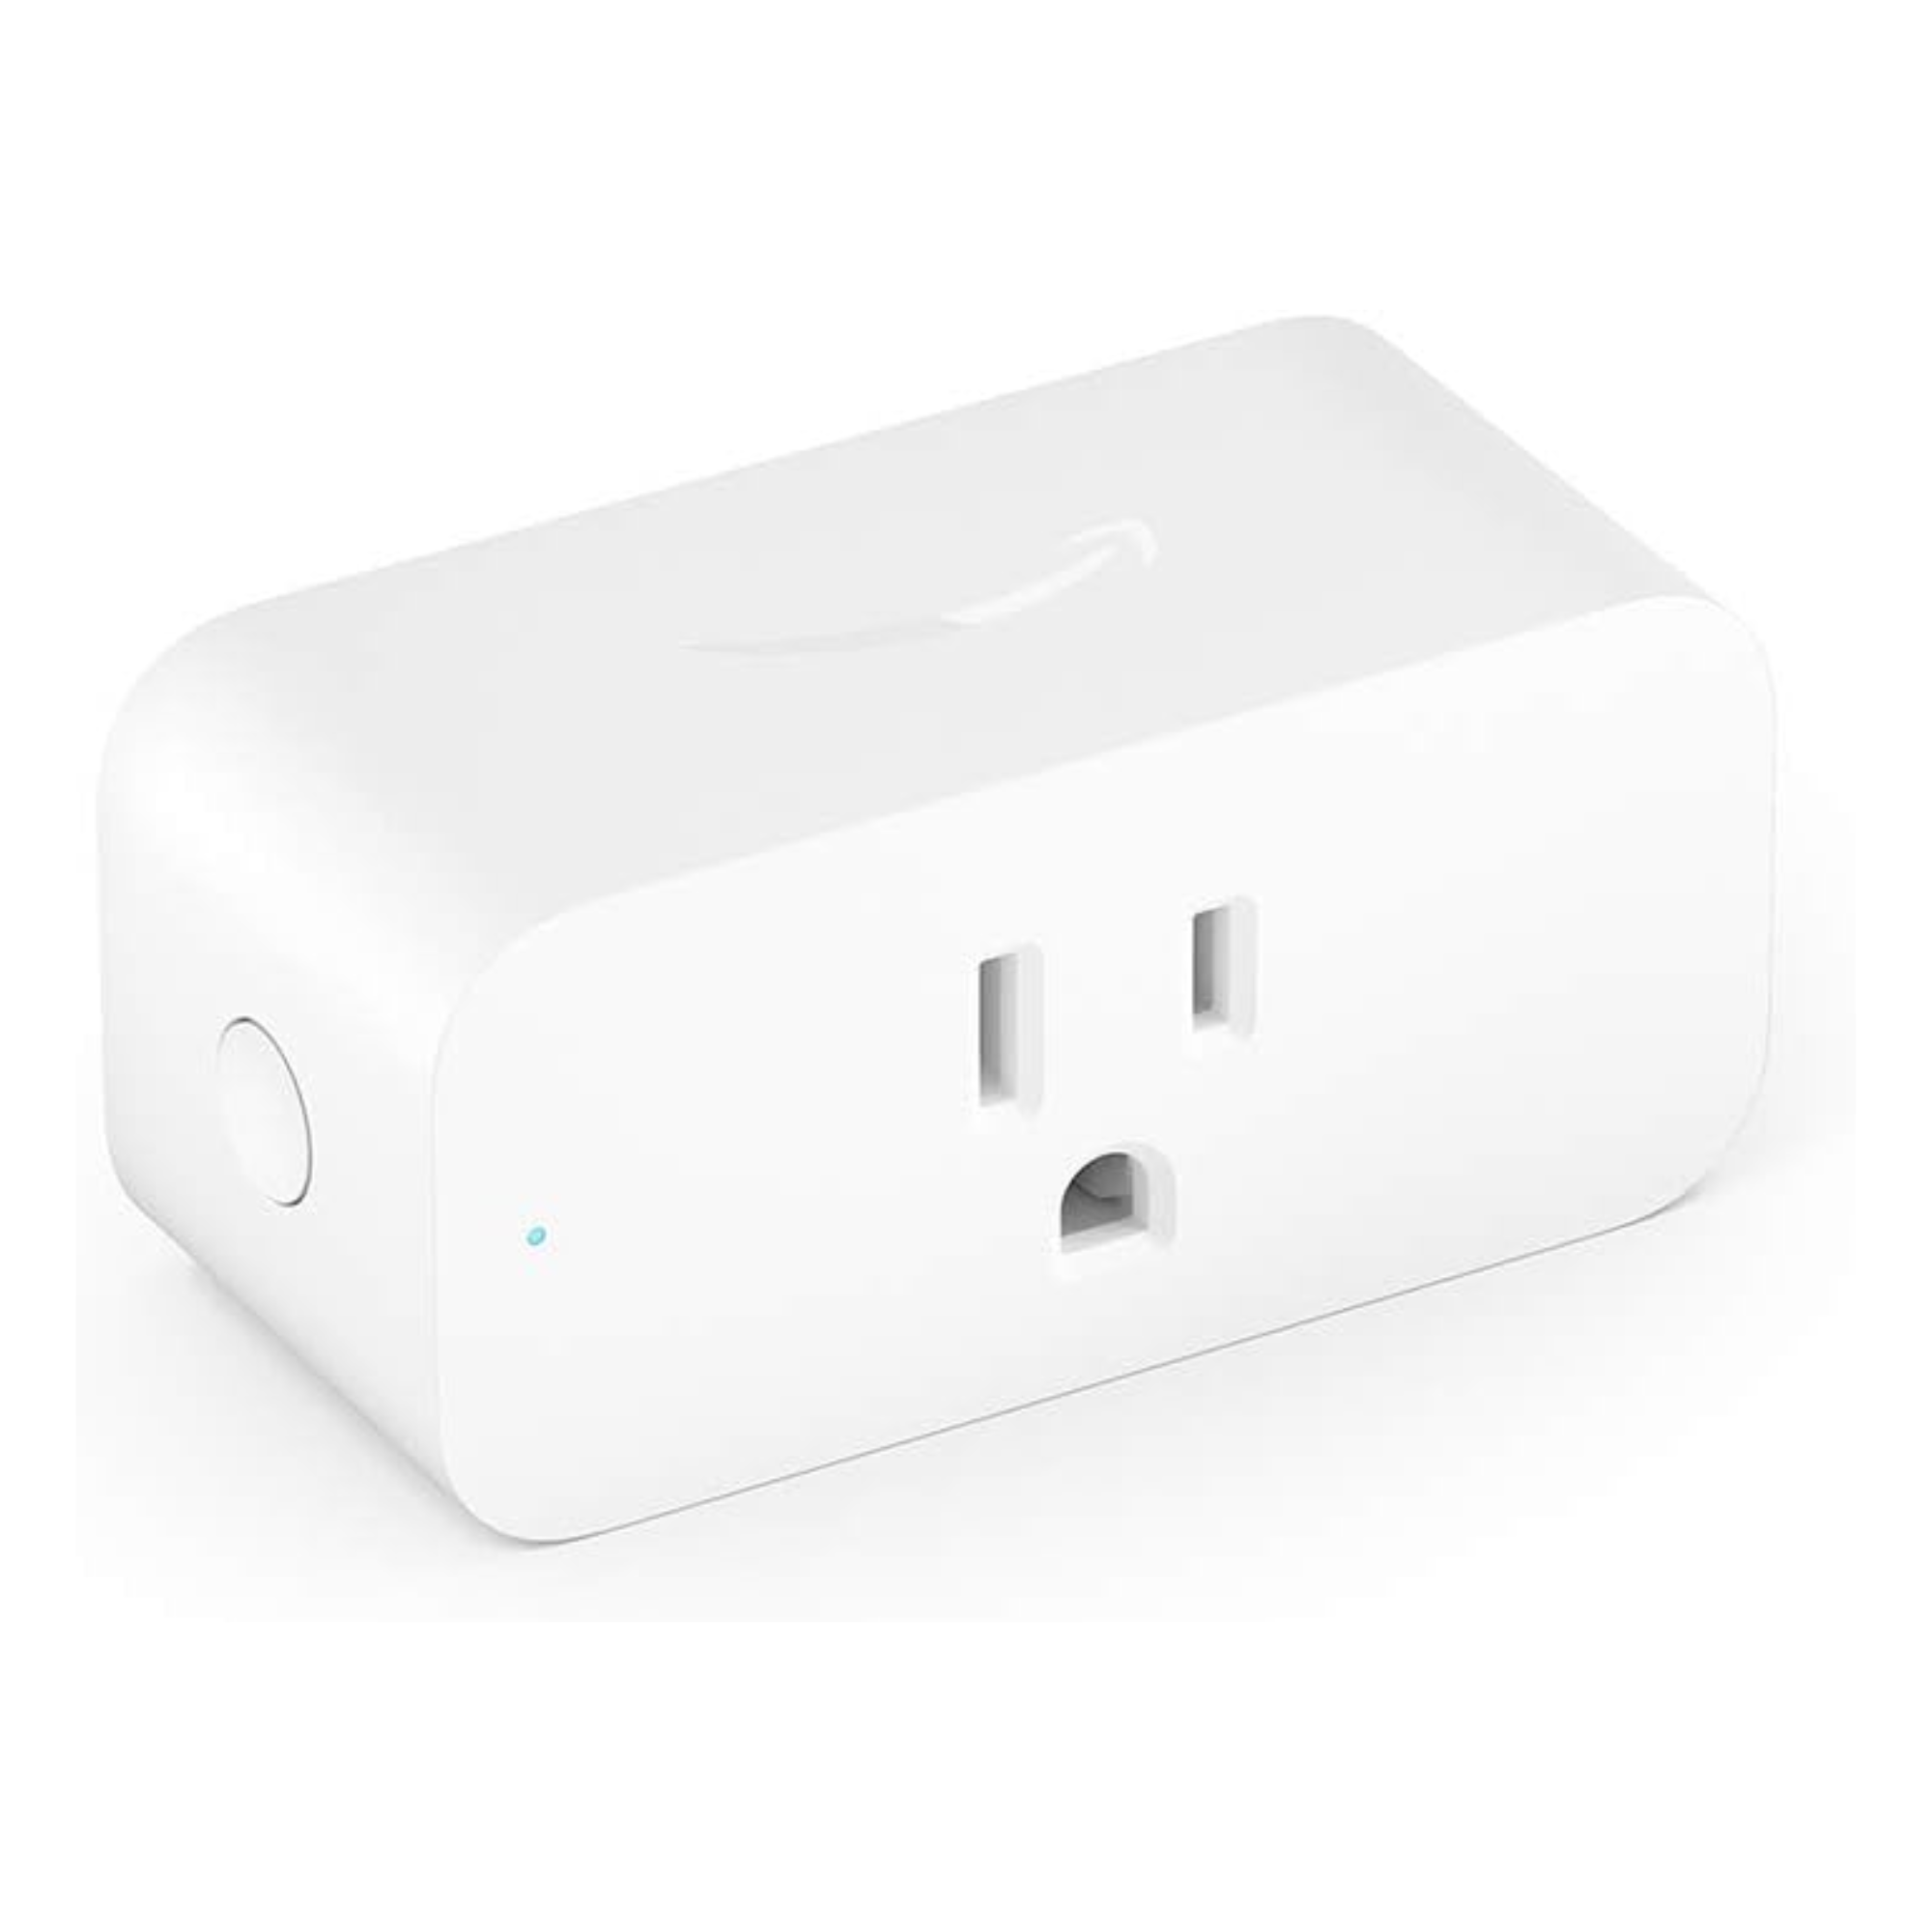 A white Smart plus for outlet